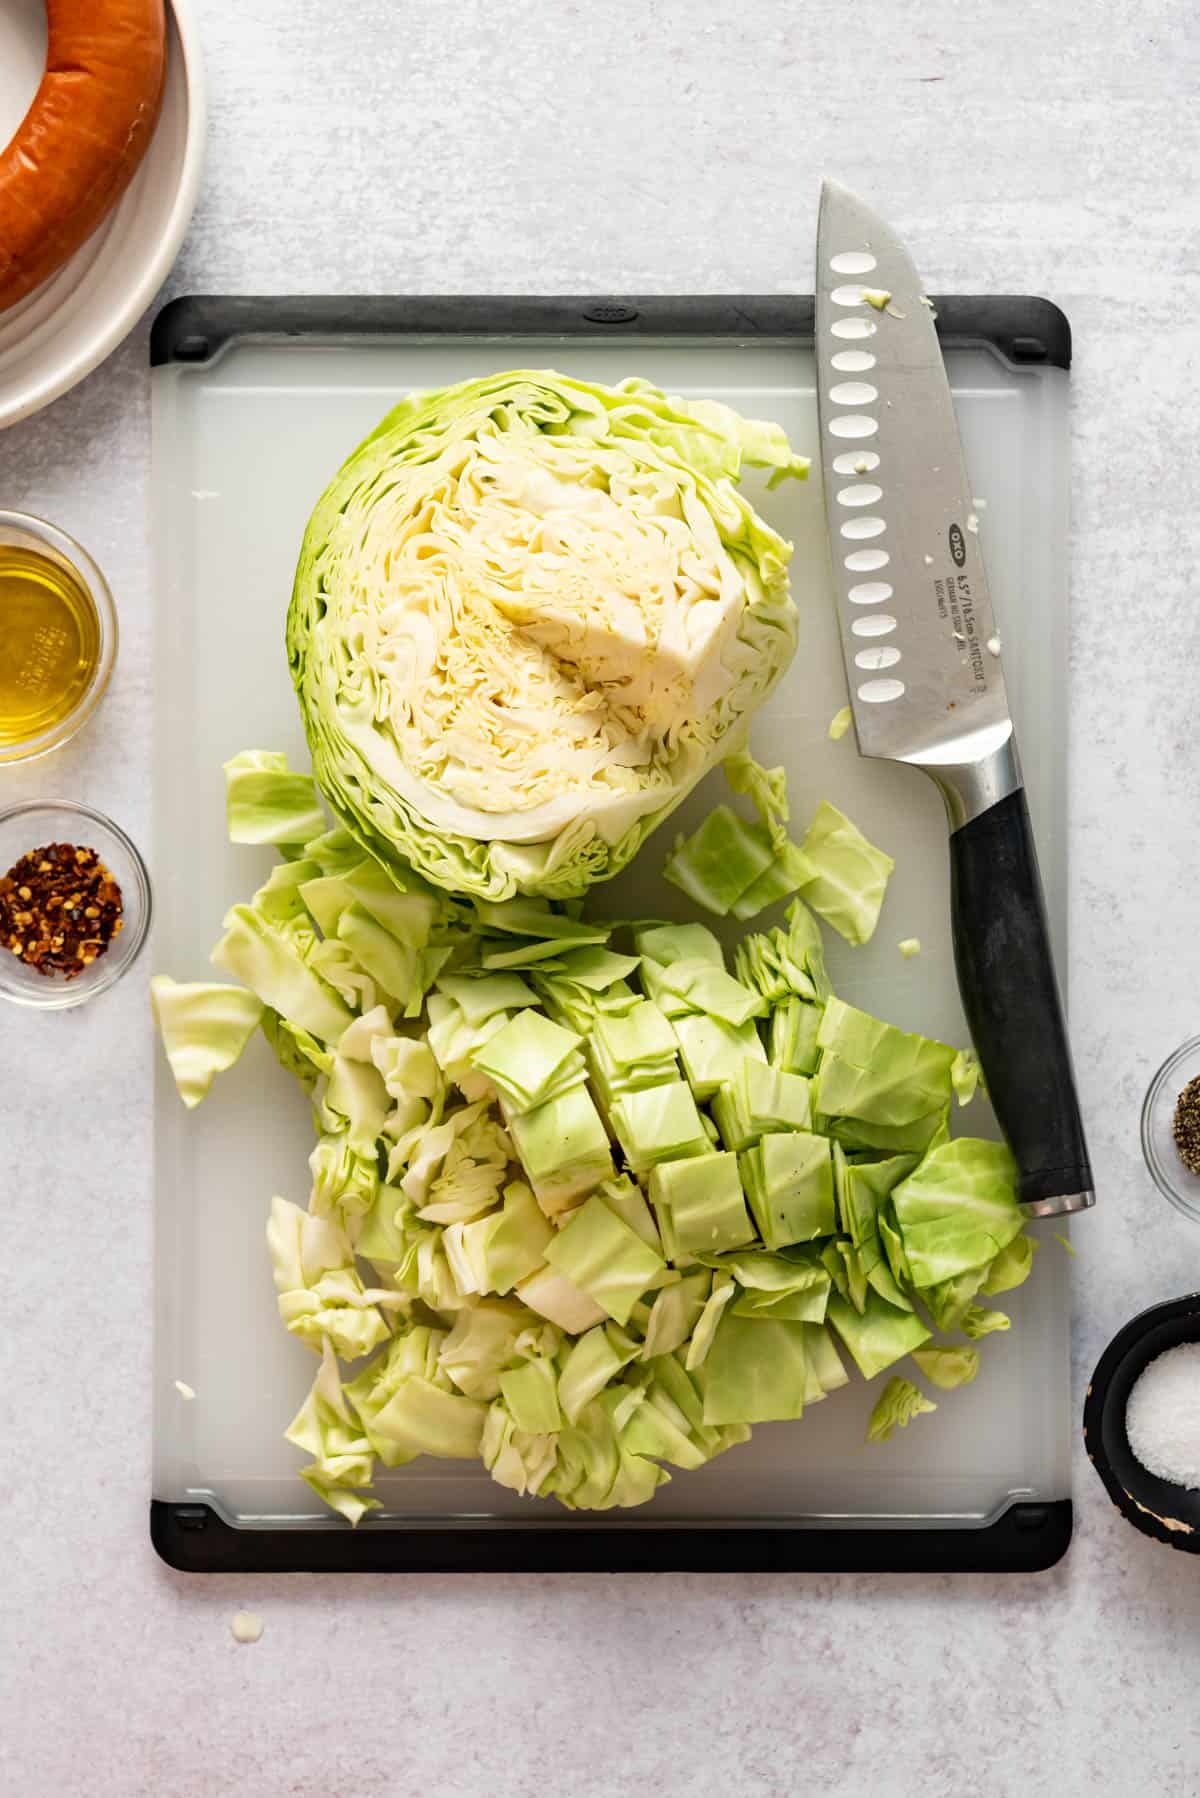 Half a head of green cabbage next to chopped cabbage with a knife on a cutting board.